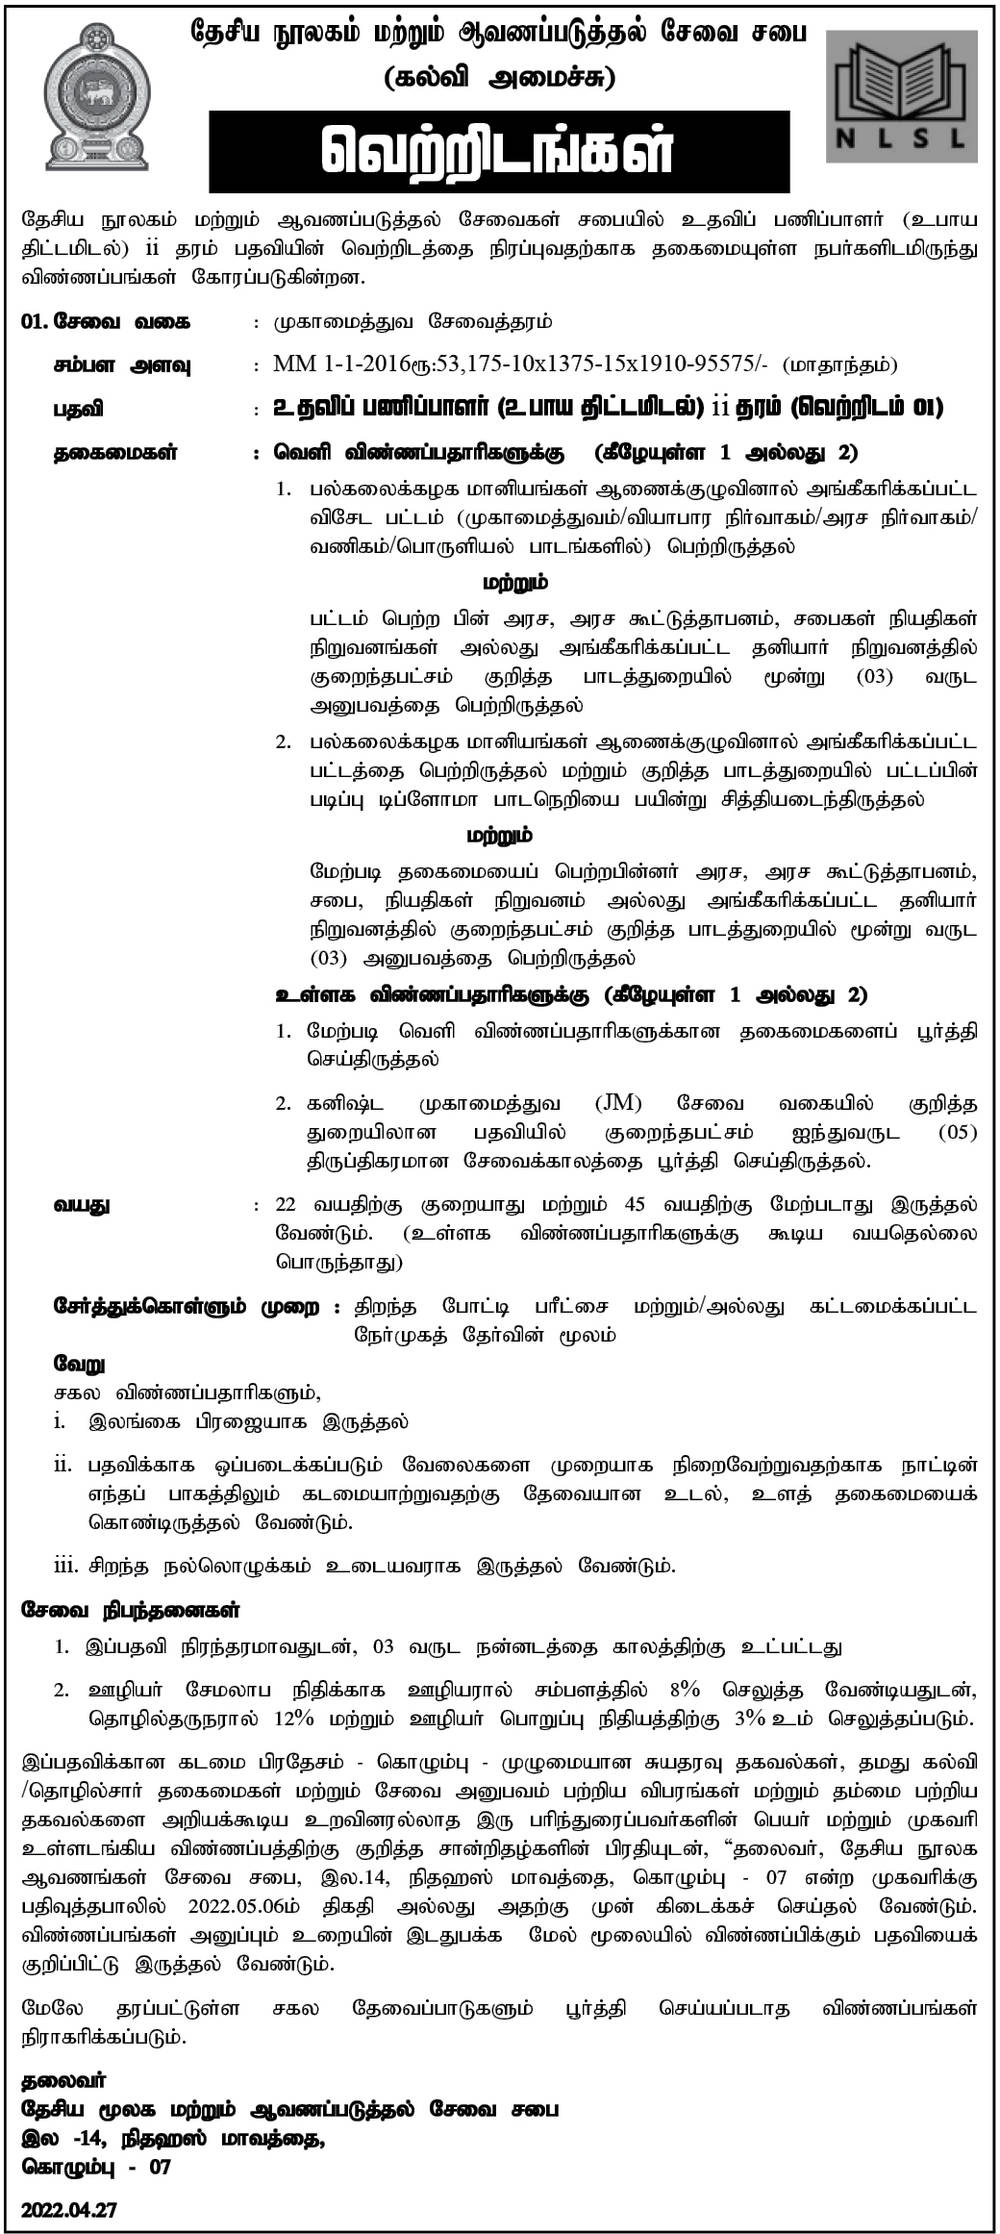 National Library and Documentation Services Board Vacancies in Tamil